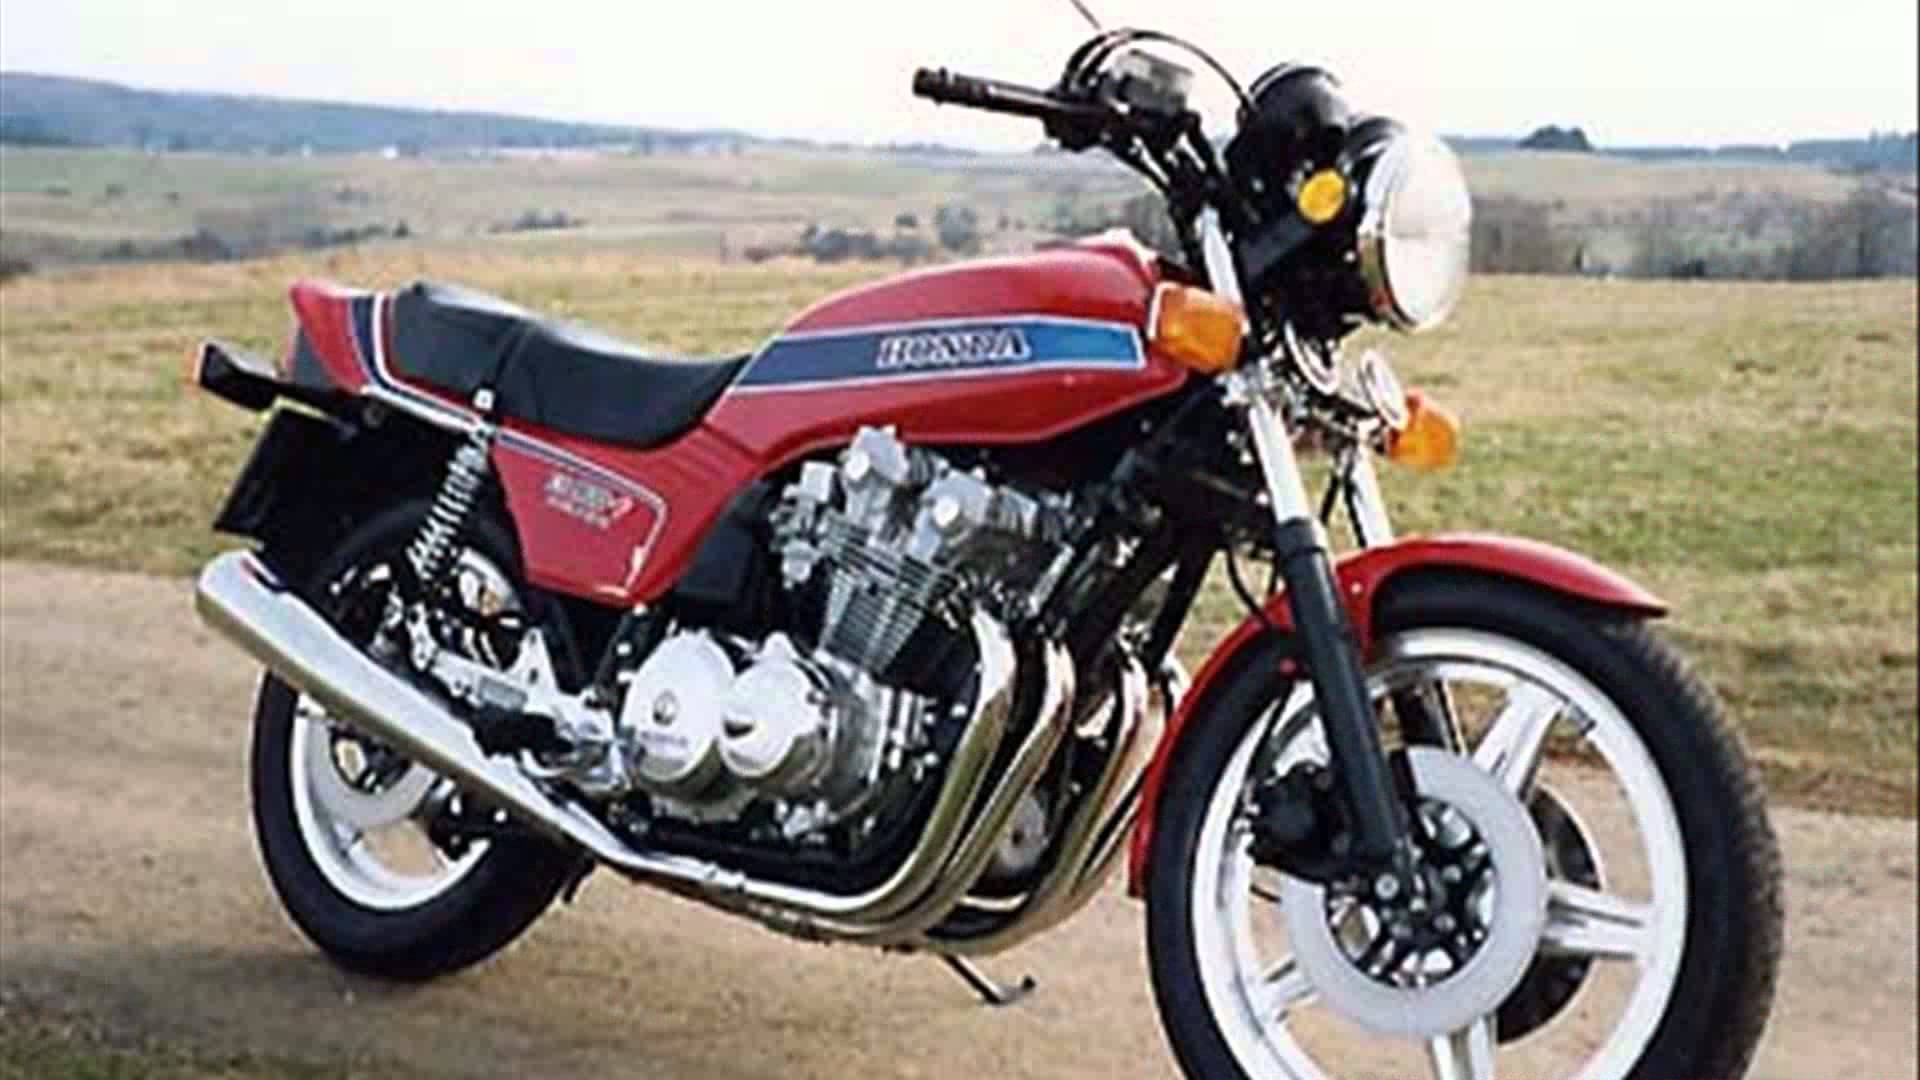 1982 honda cb900f for sale Doing well in IPL is fine